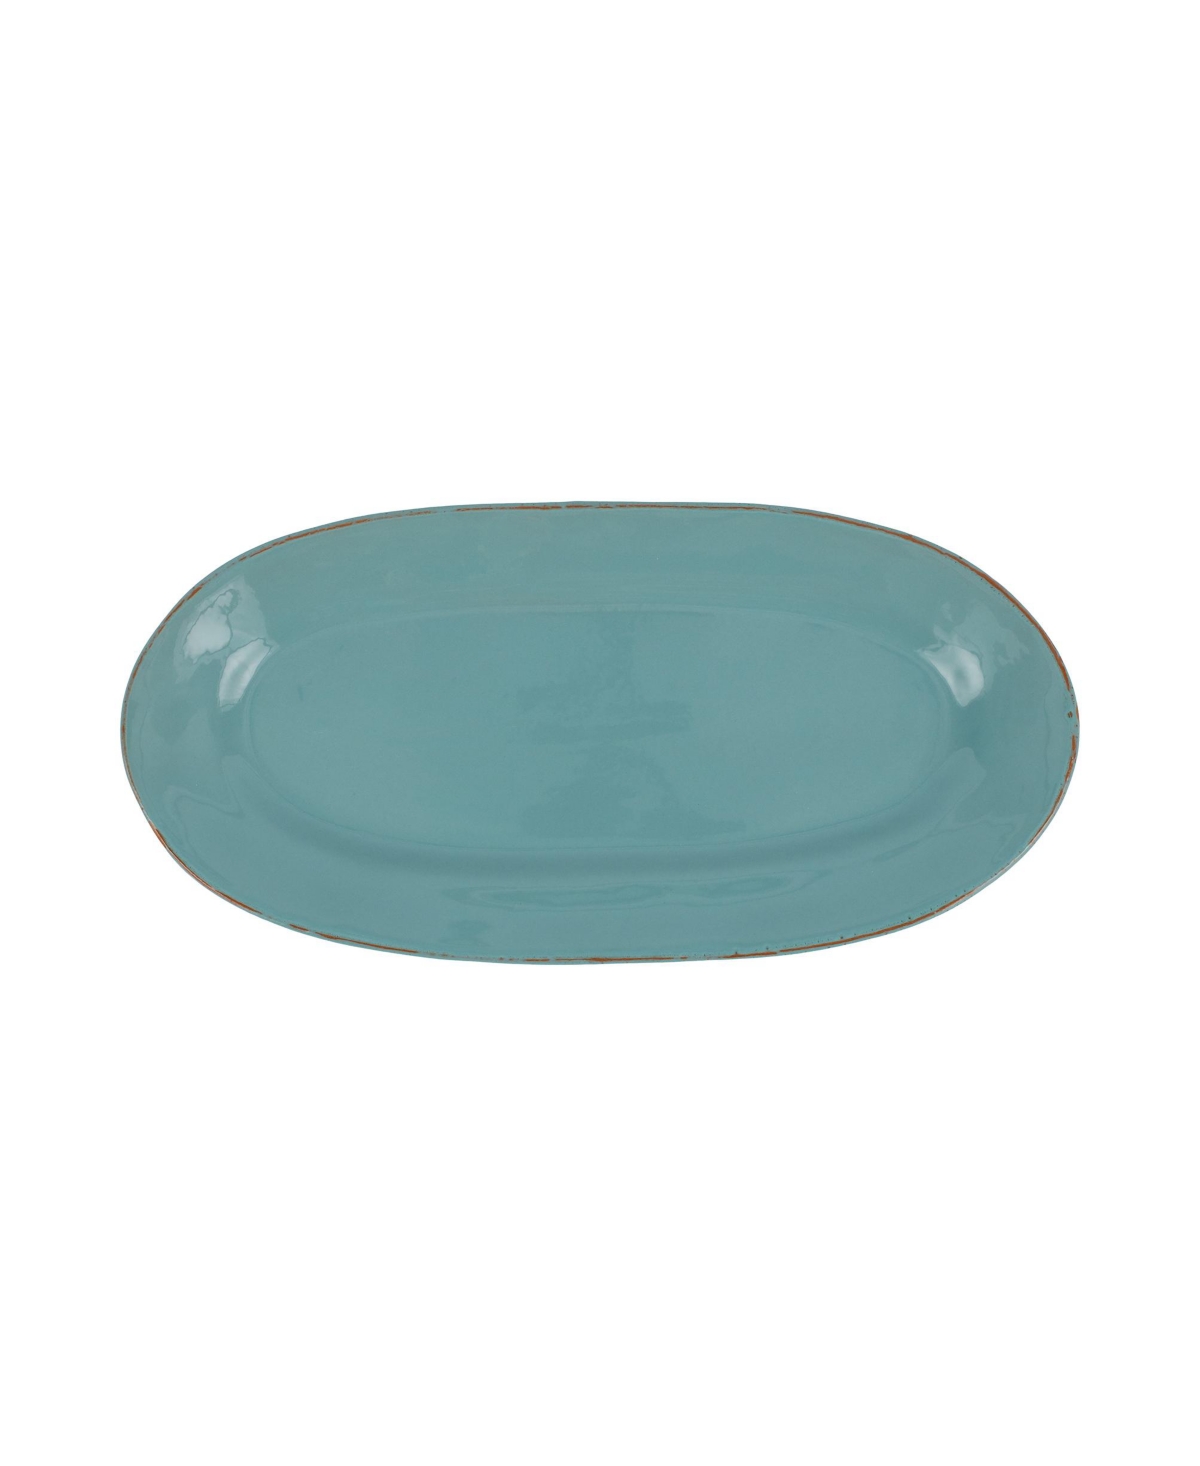 Vietri Cucina Fresca Narrow Oval Platter In Turquoise